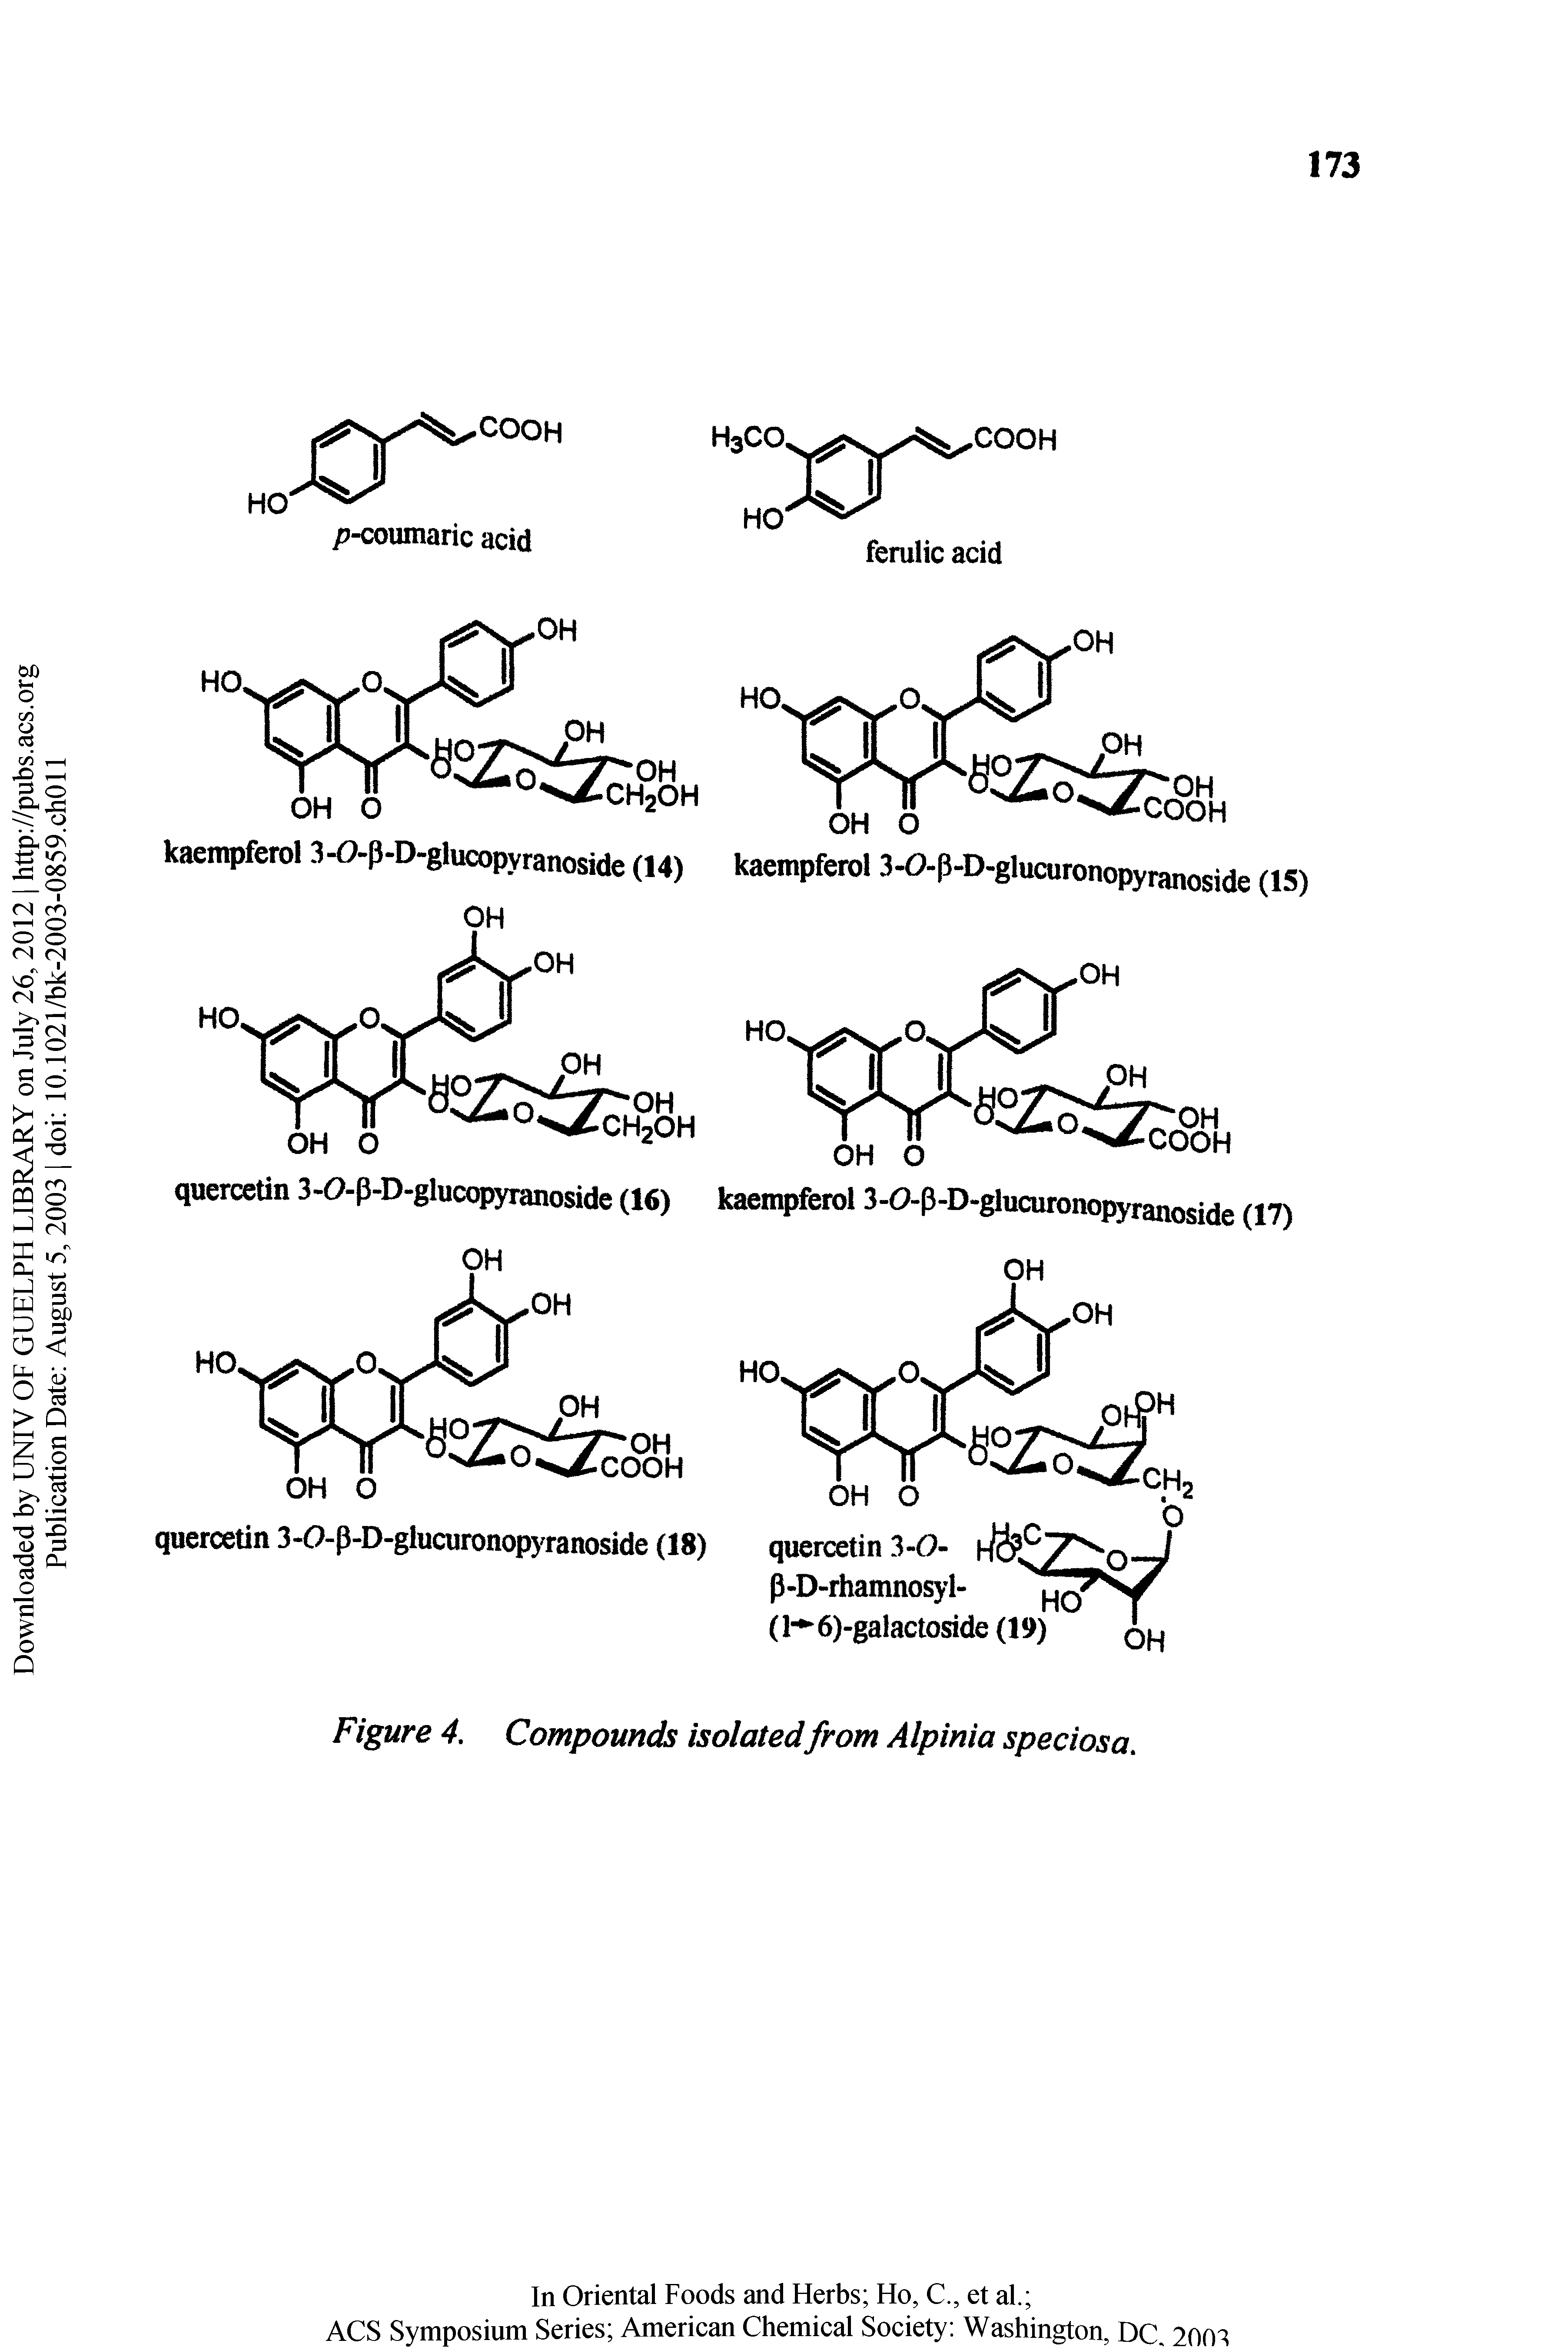 Figure 4. Compounds isolated from Alpinia speciosa.